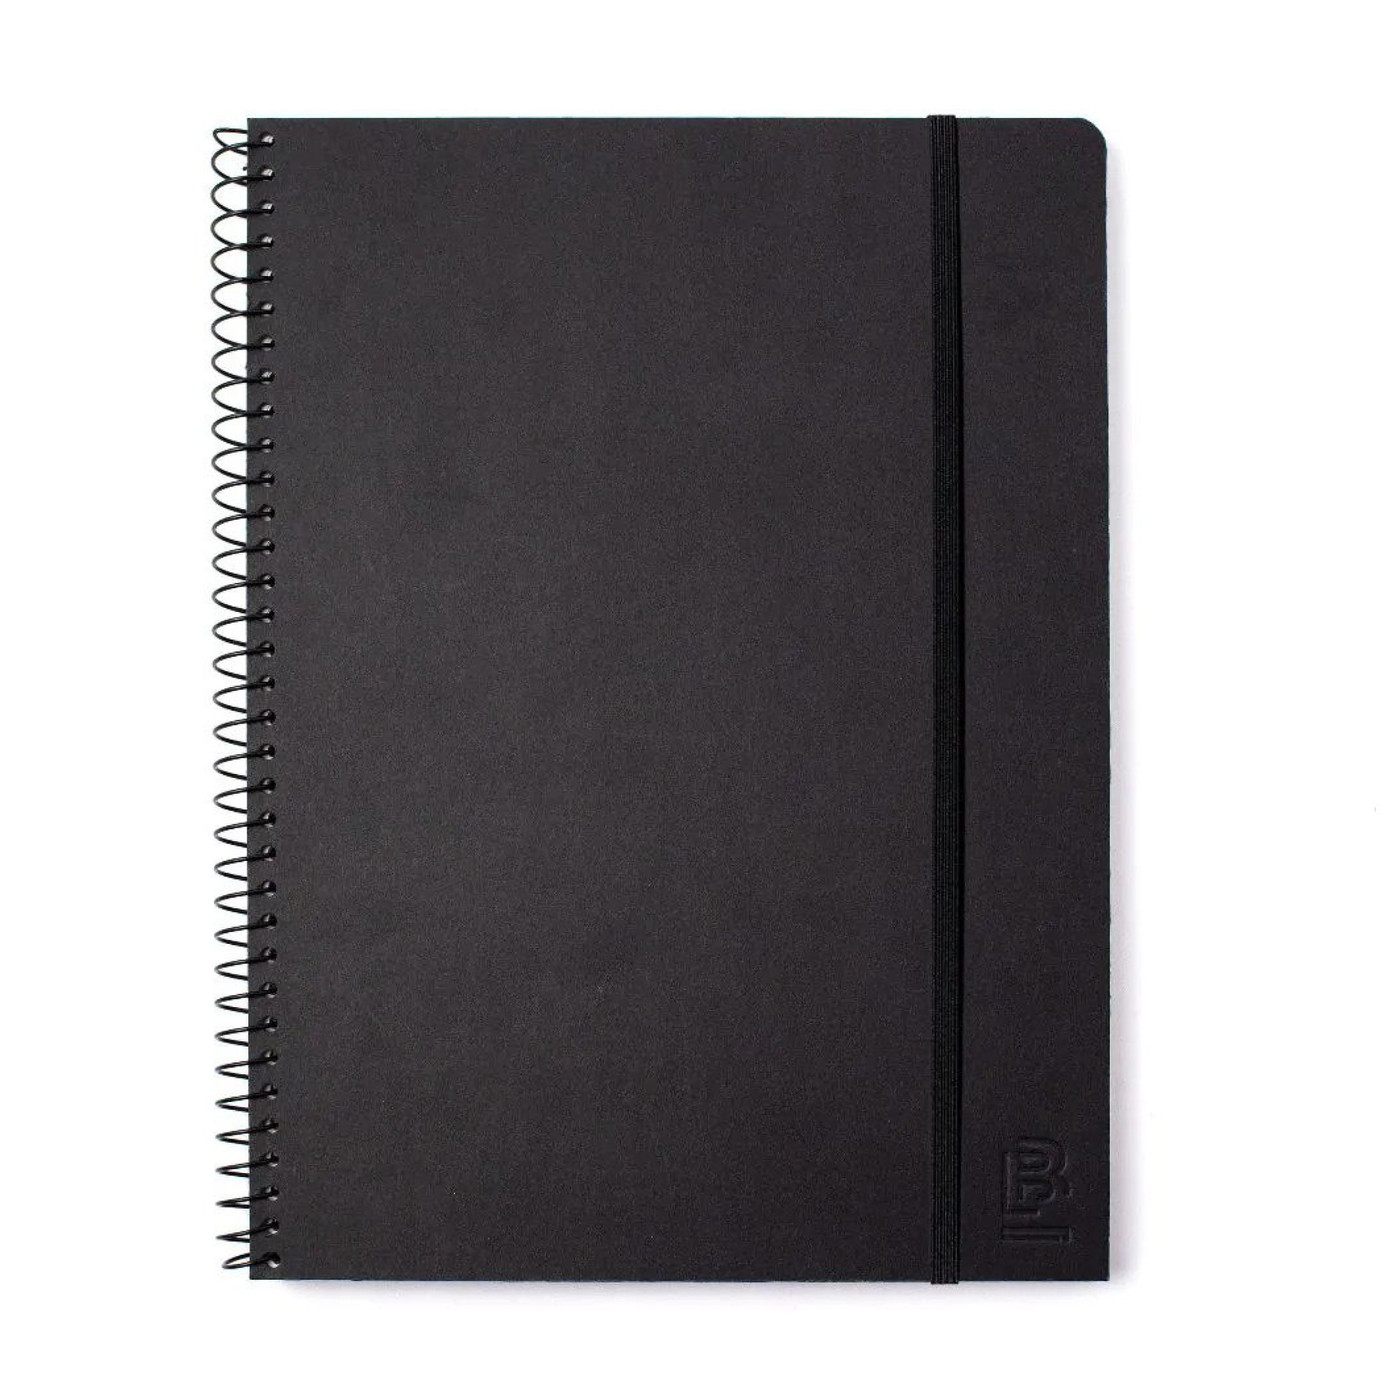 Blackwing spiral notebook - A4 - DOTTED